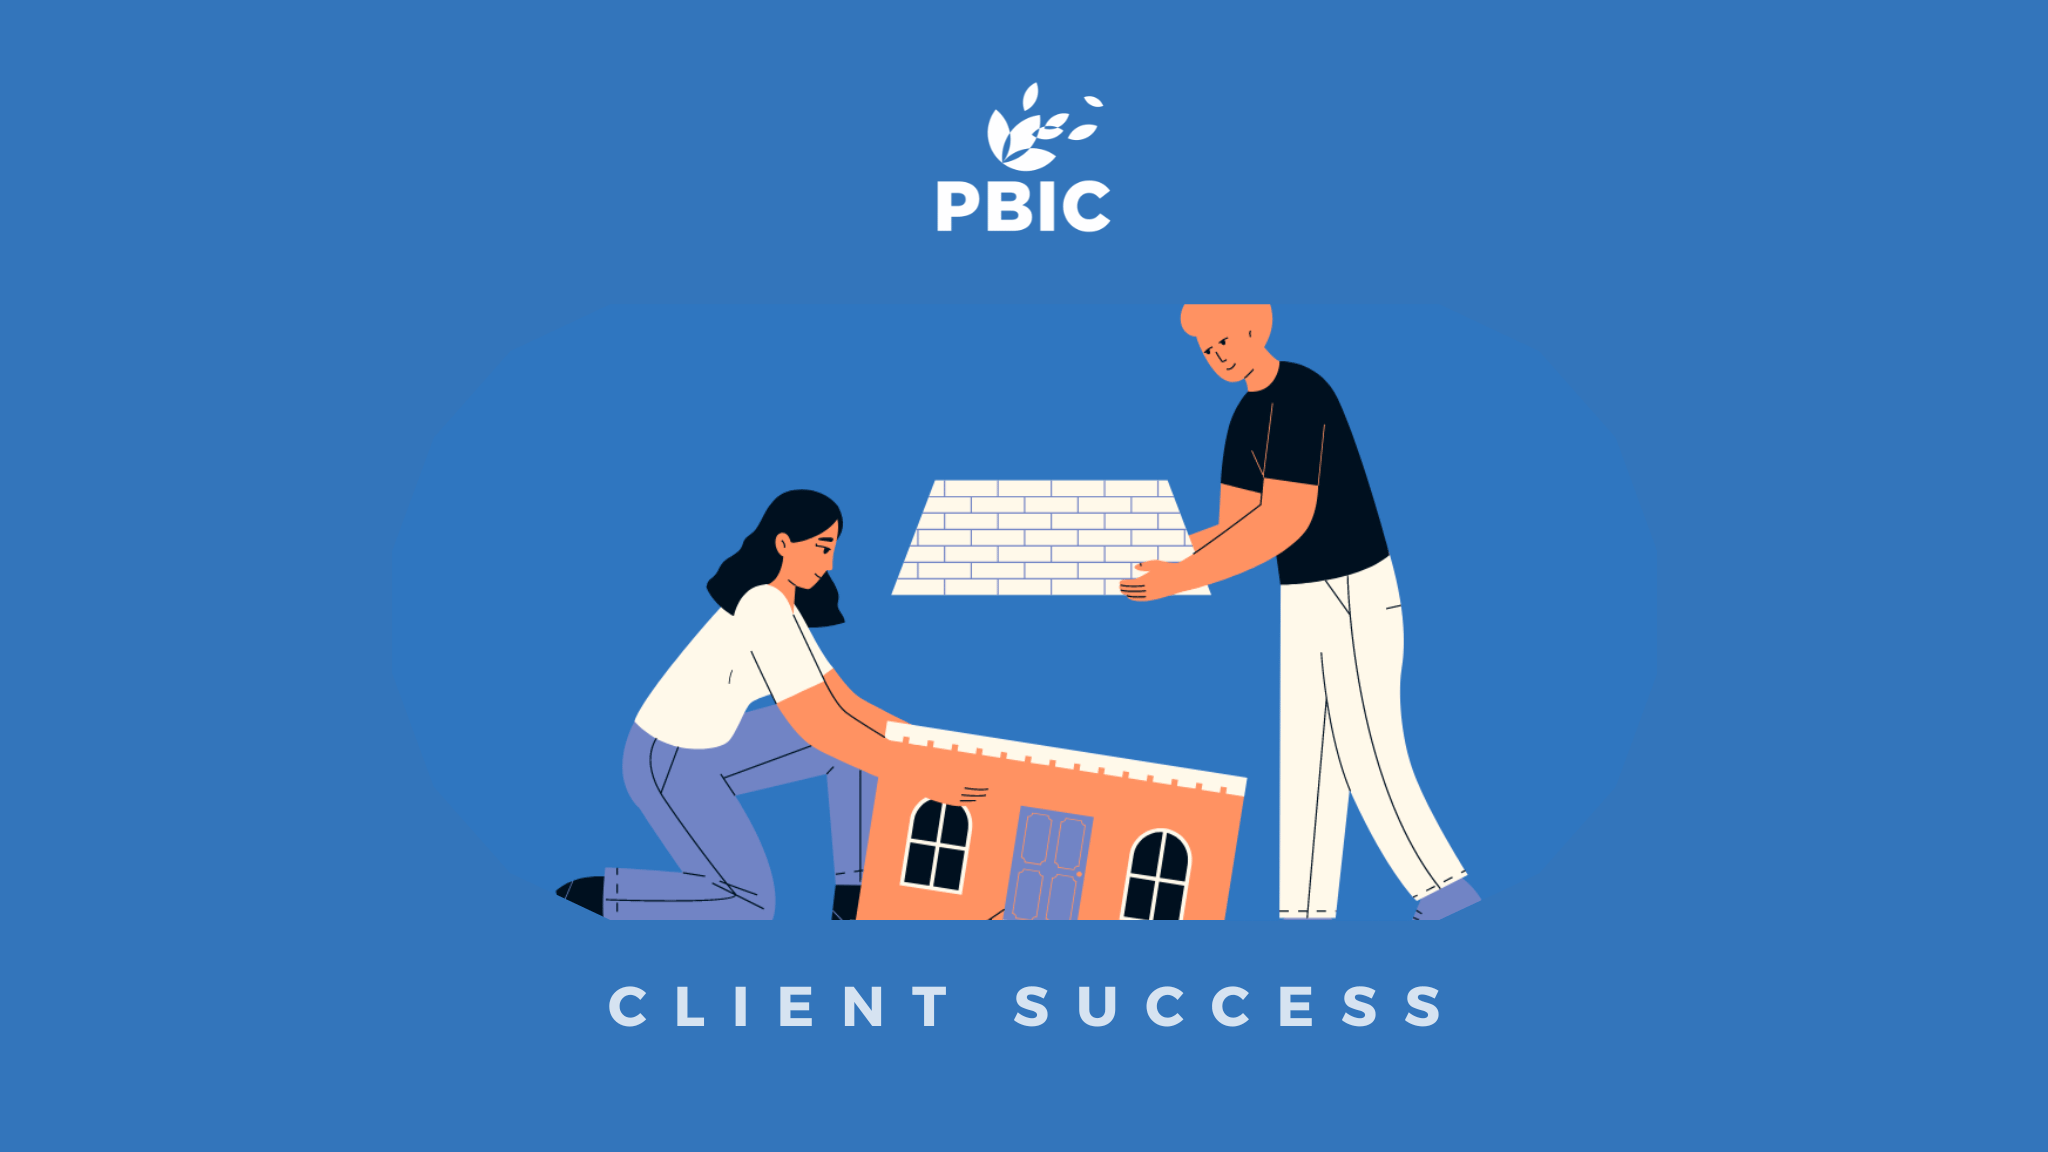 Client Success: How PBIC helped a homeless client with accommodation